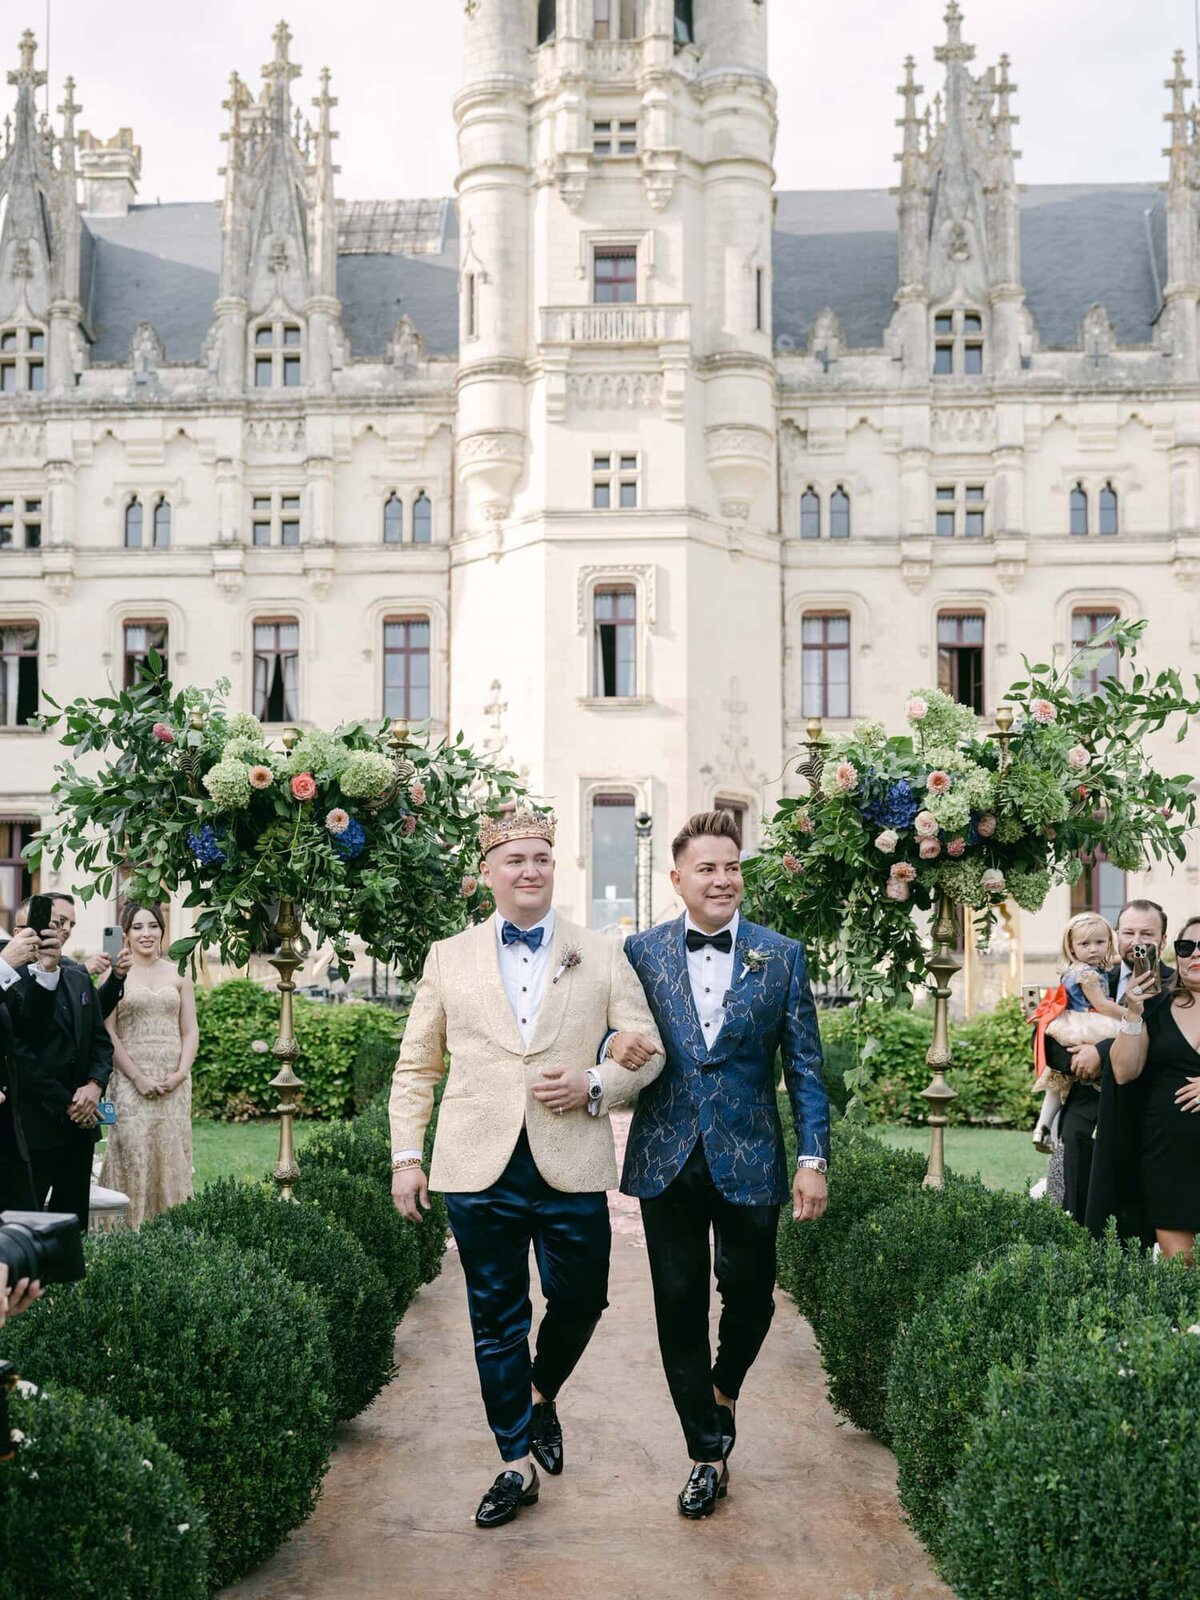 Destination wedding in France - Chateau Challain - Serenity Photography - 34